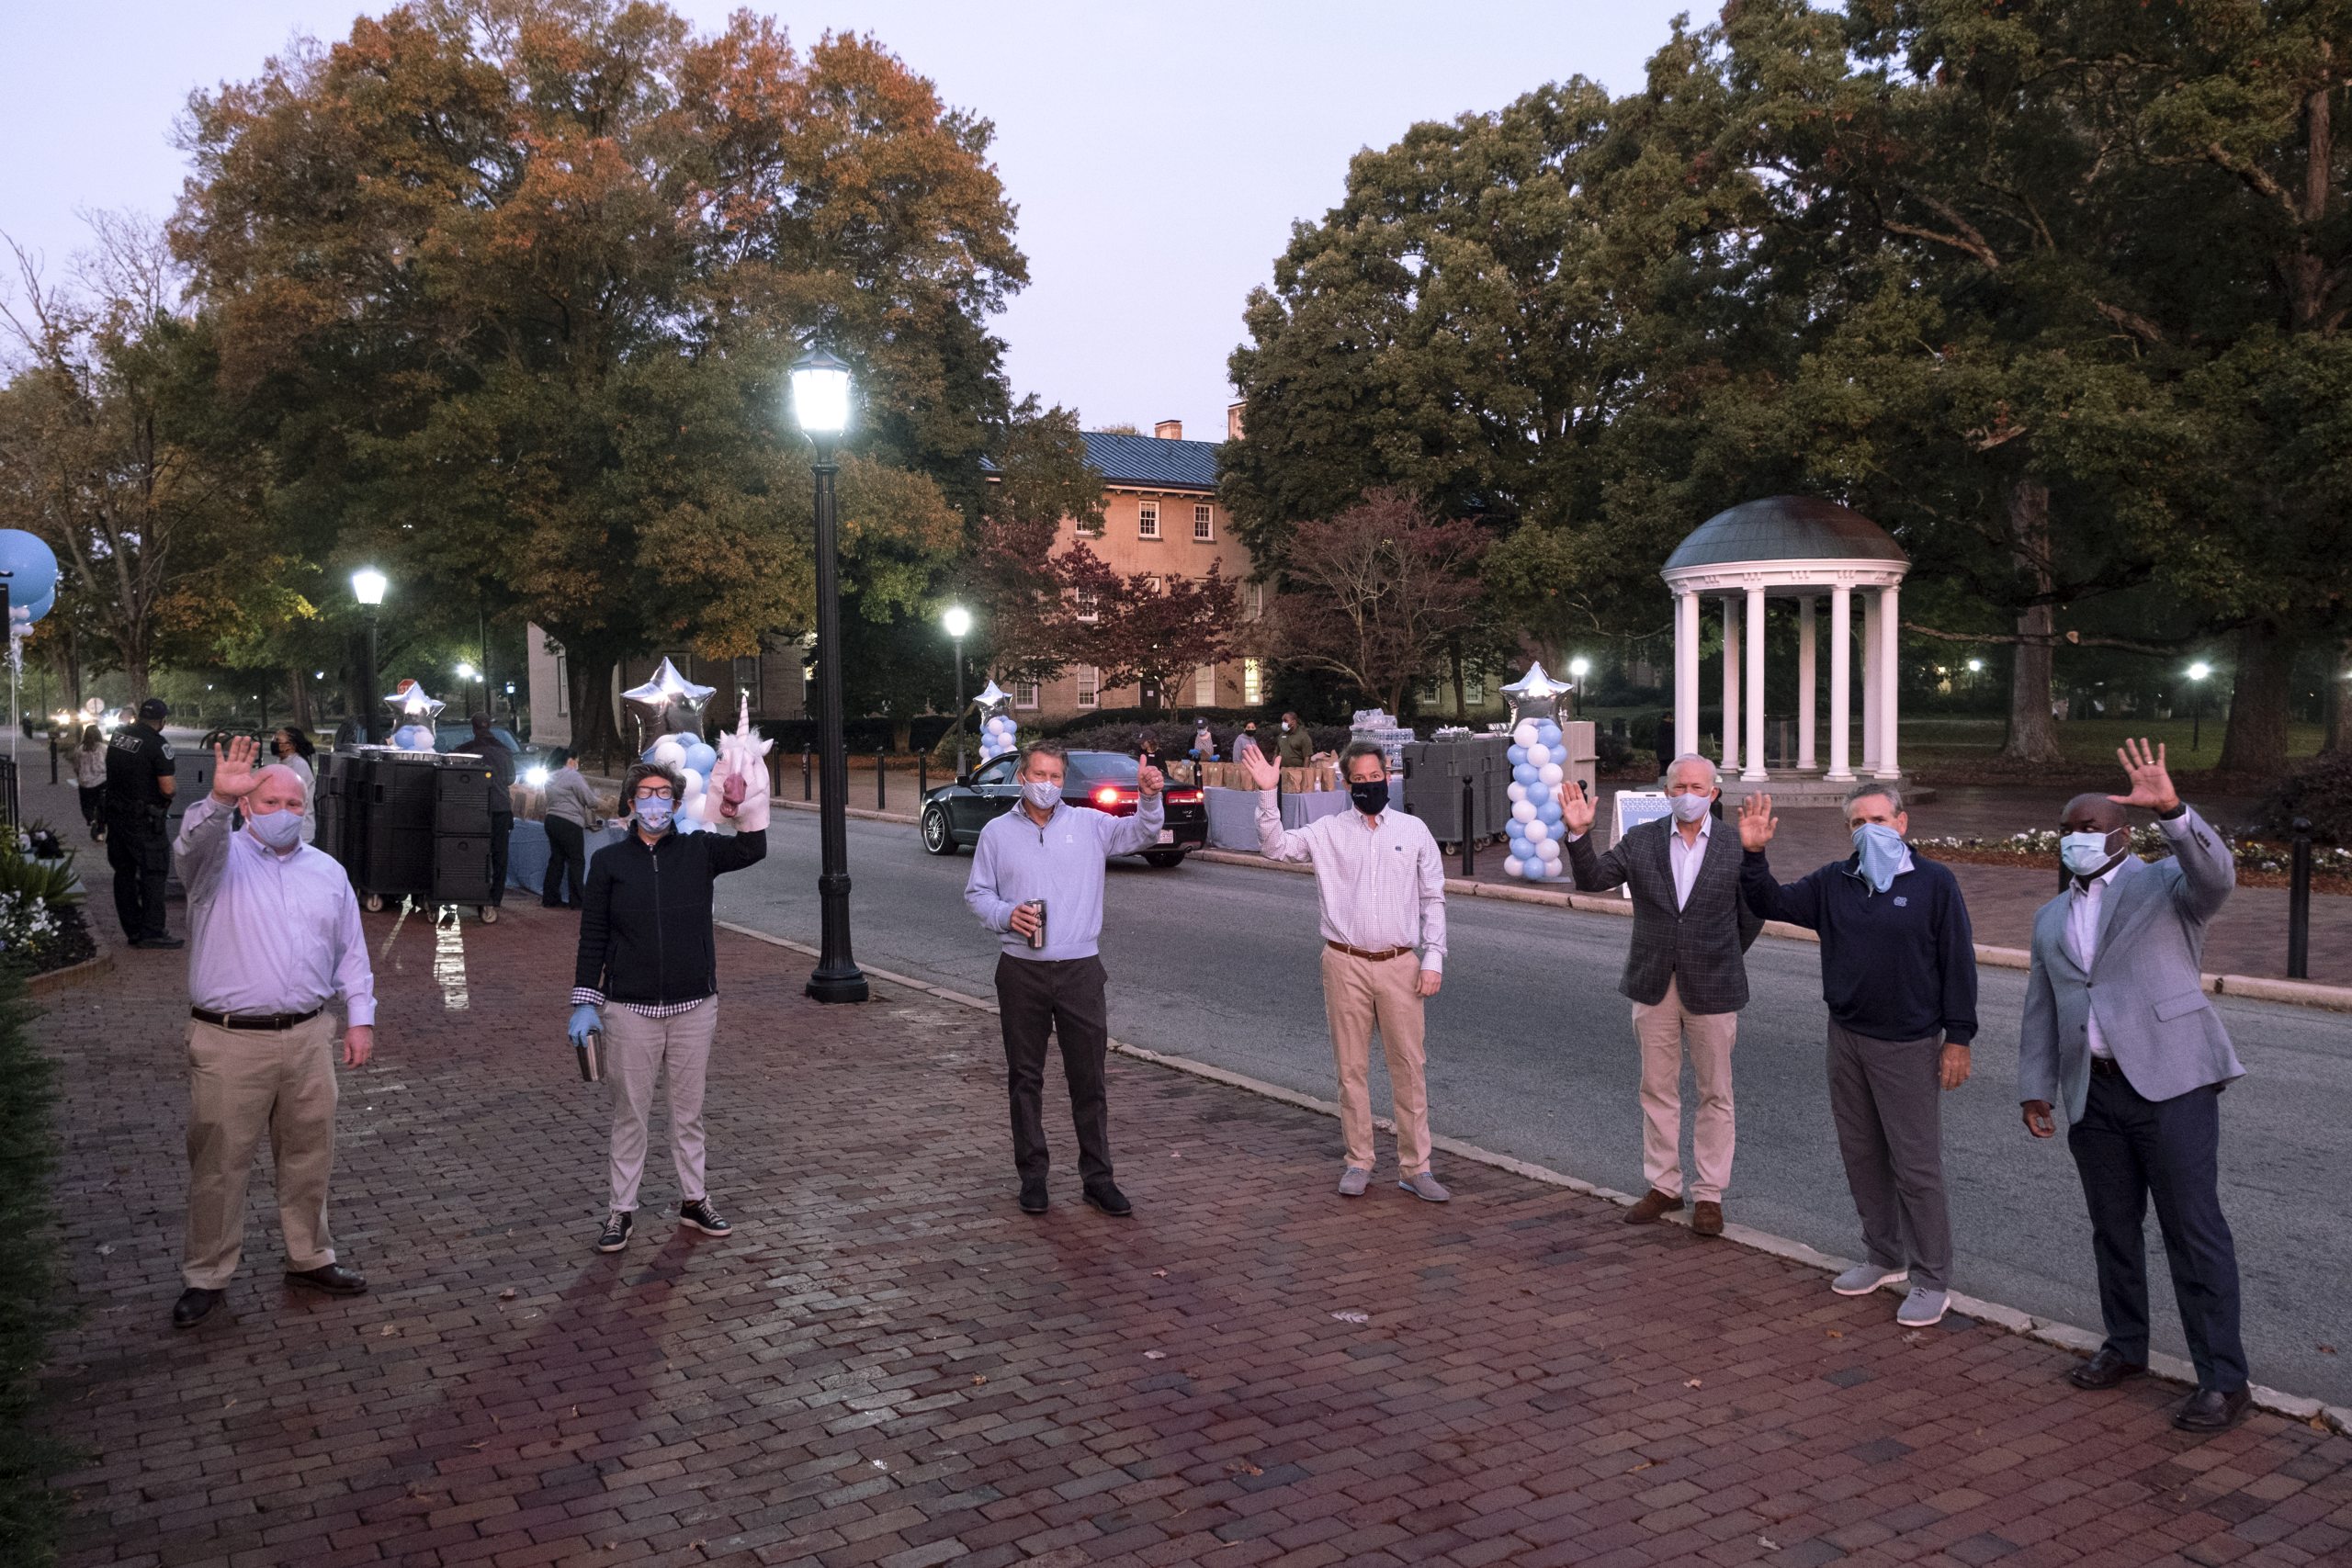 Campus leaders gathered in front of the Old Well at sunrise to hand out breakfast to show their appreciation to the University's employees.